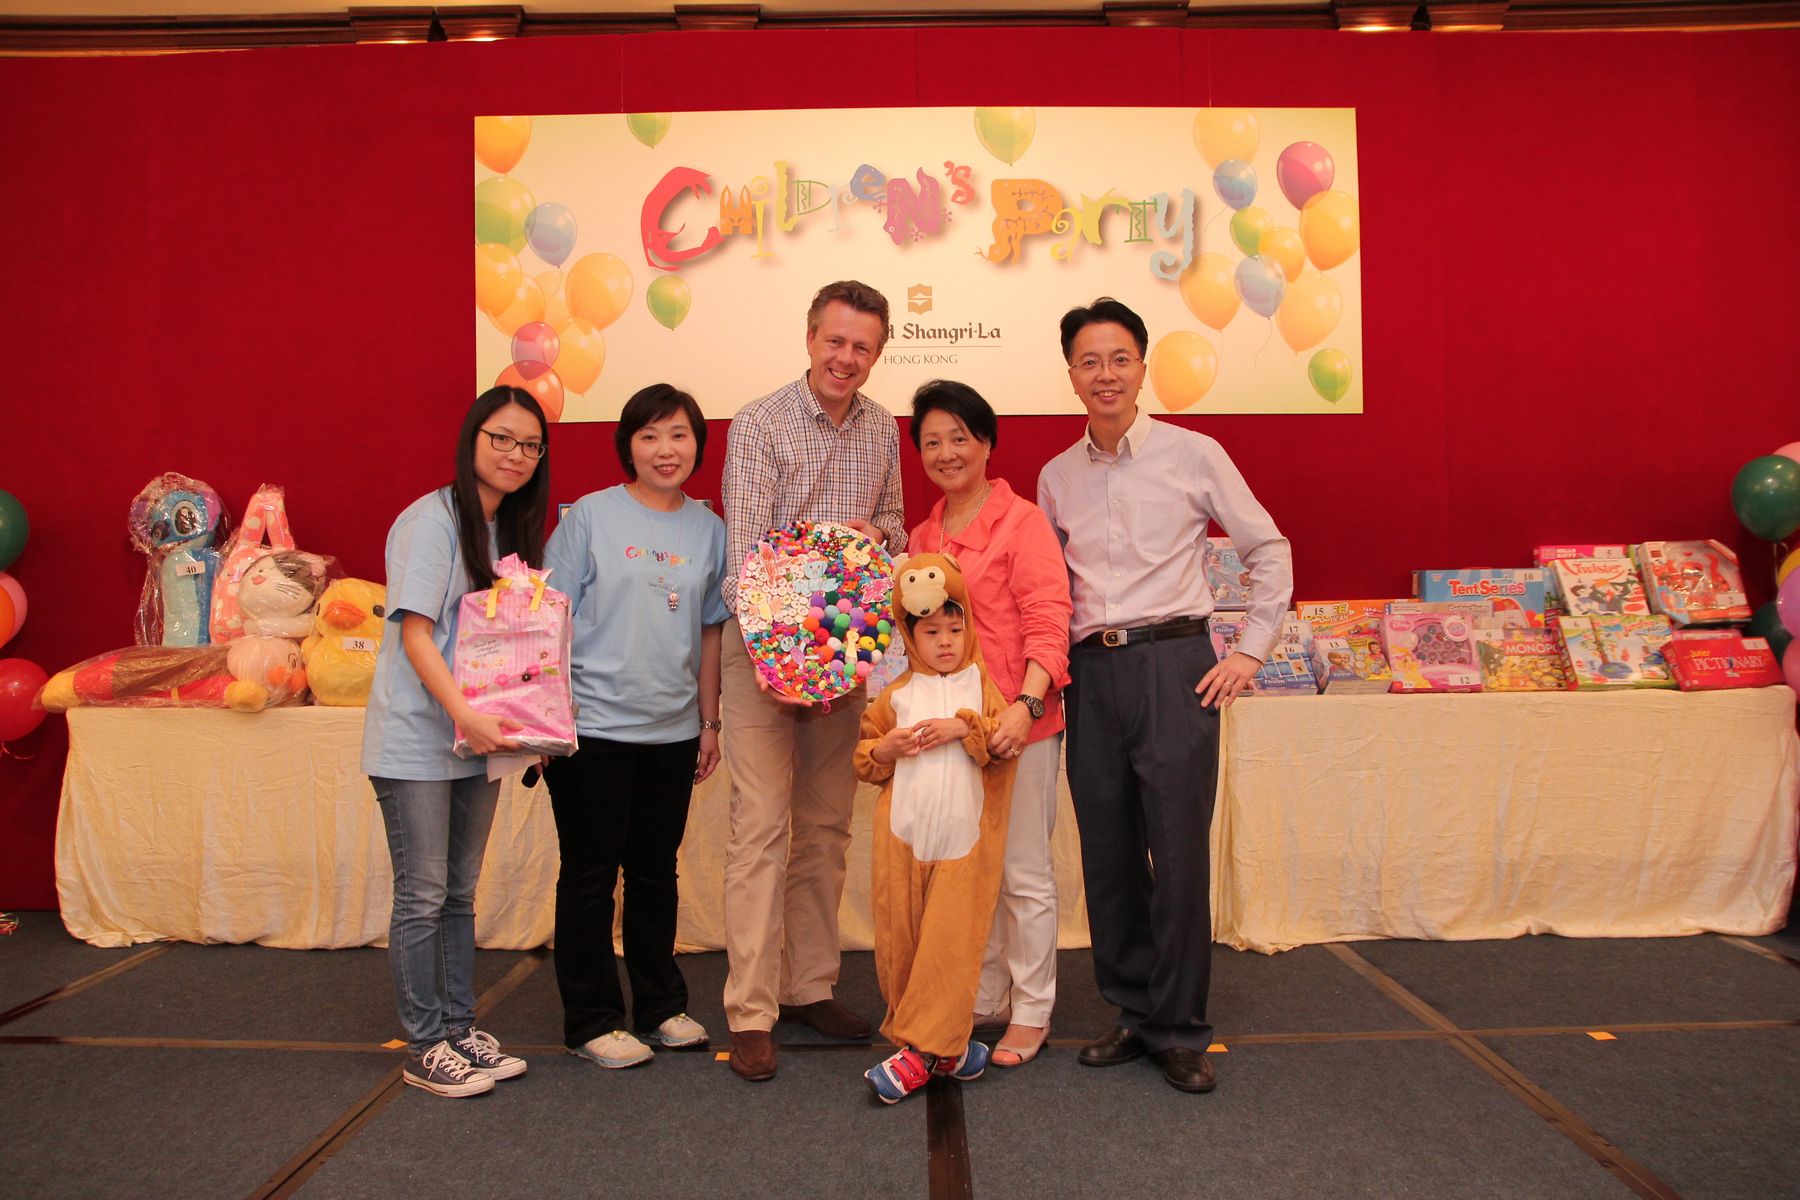 Island Shangri-La, Hong Kong, Celebrated Easter with Chan Chung Hon Centre Children and Parents